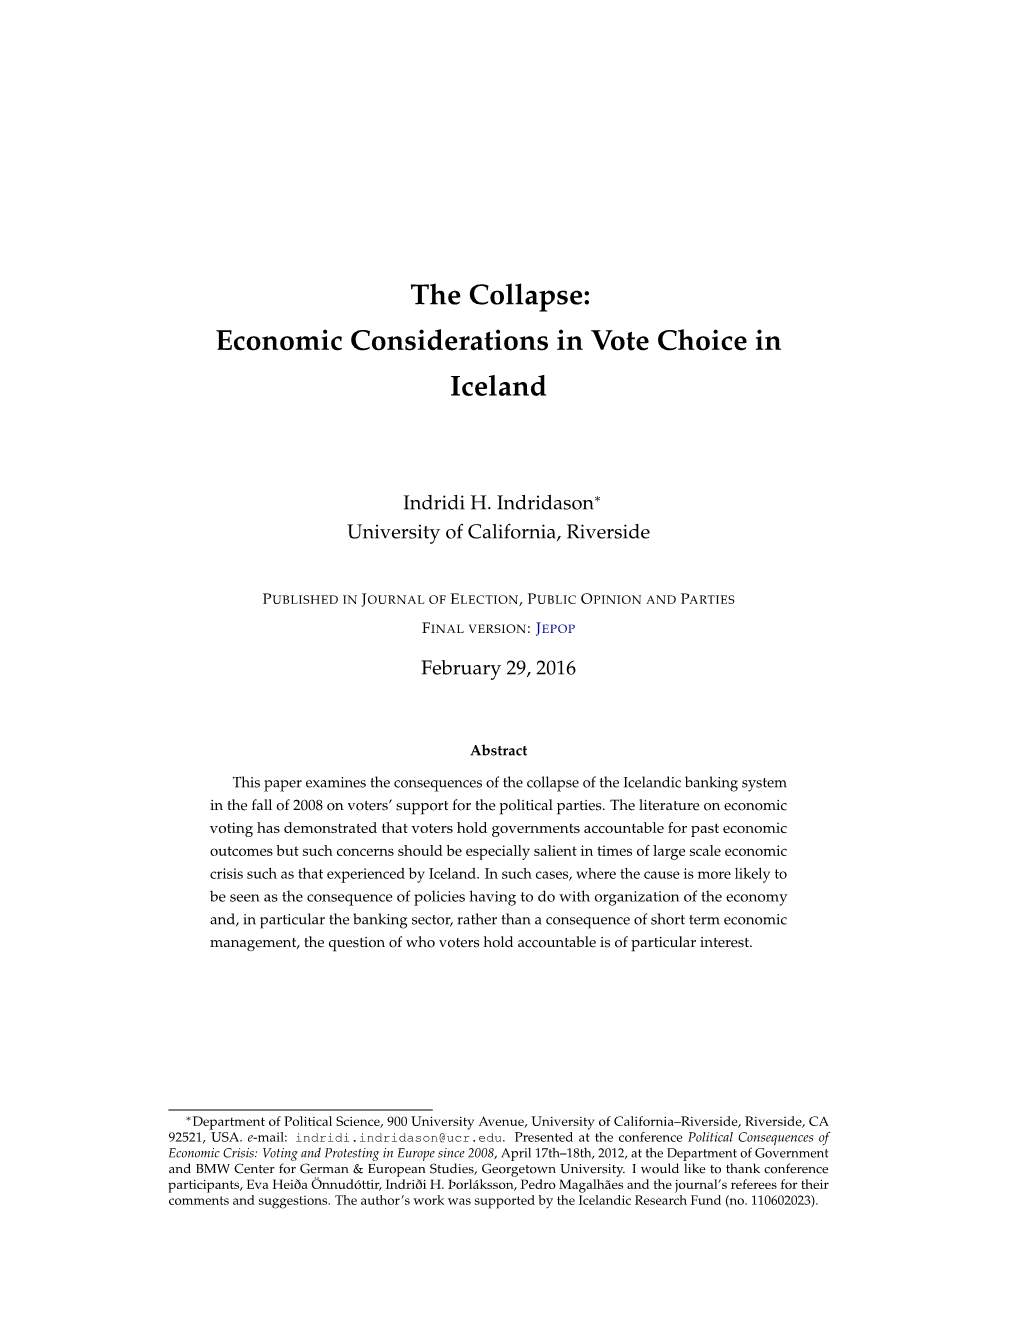 The Collapse: Economic Considerations in Vote Choice in Iceland